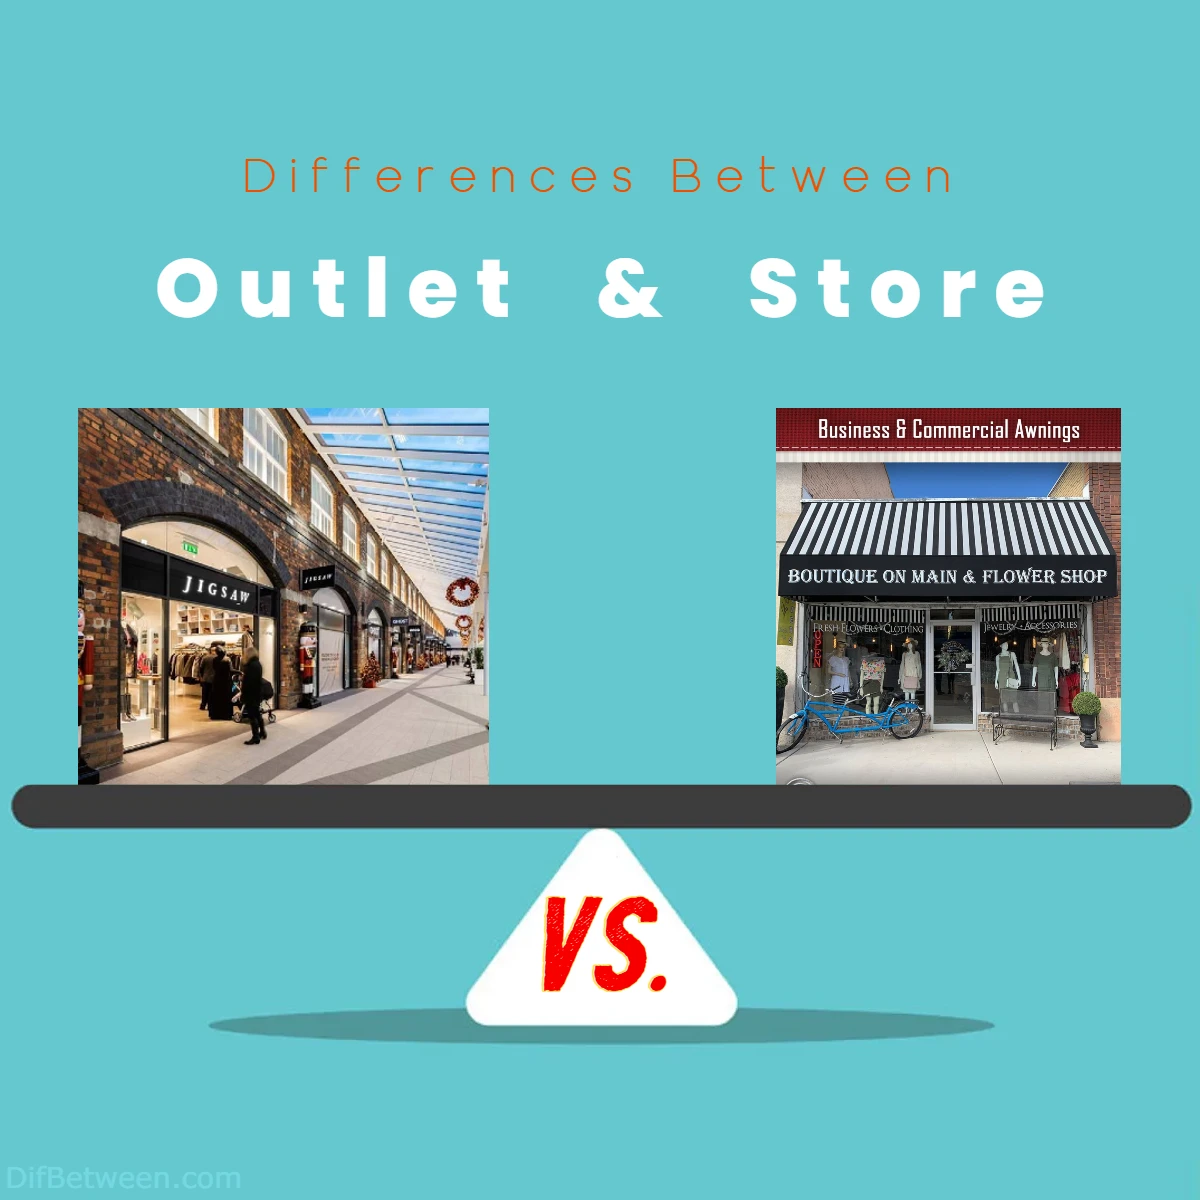 Differences Between Outlet vs Store